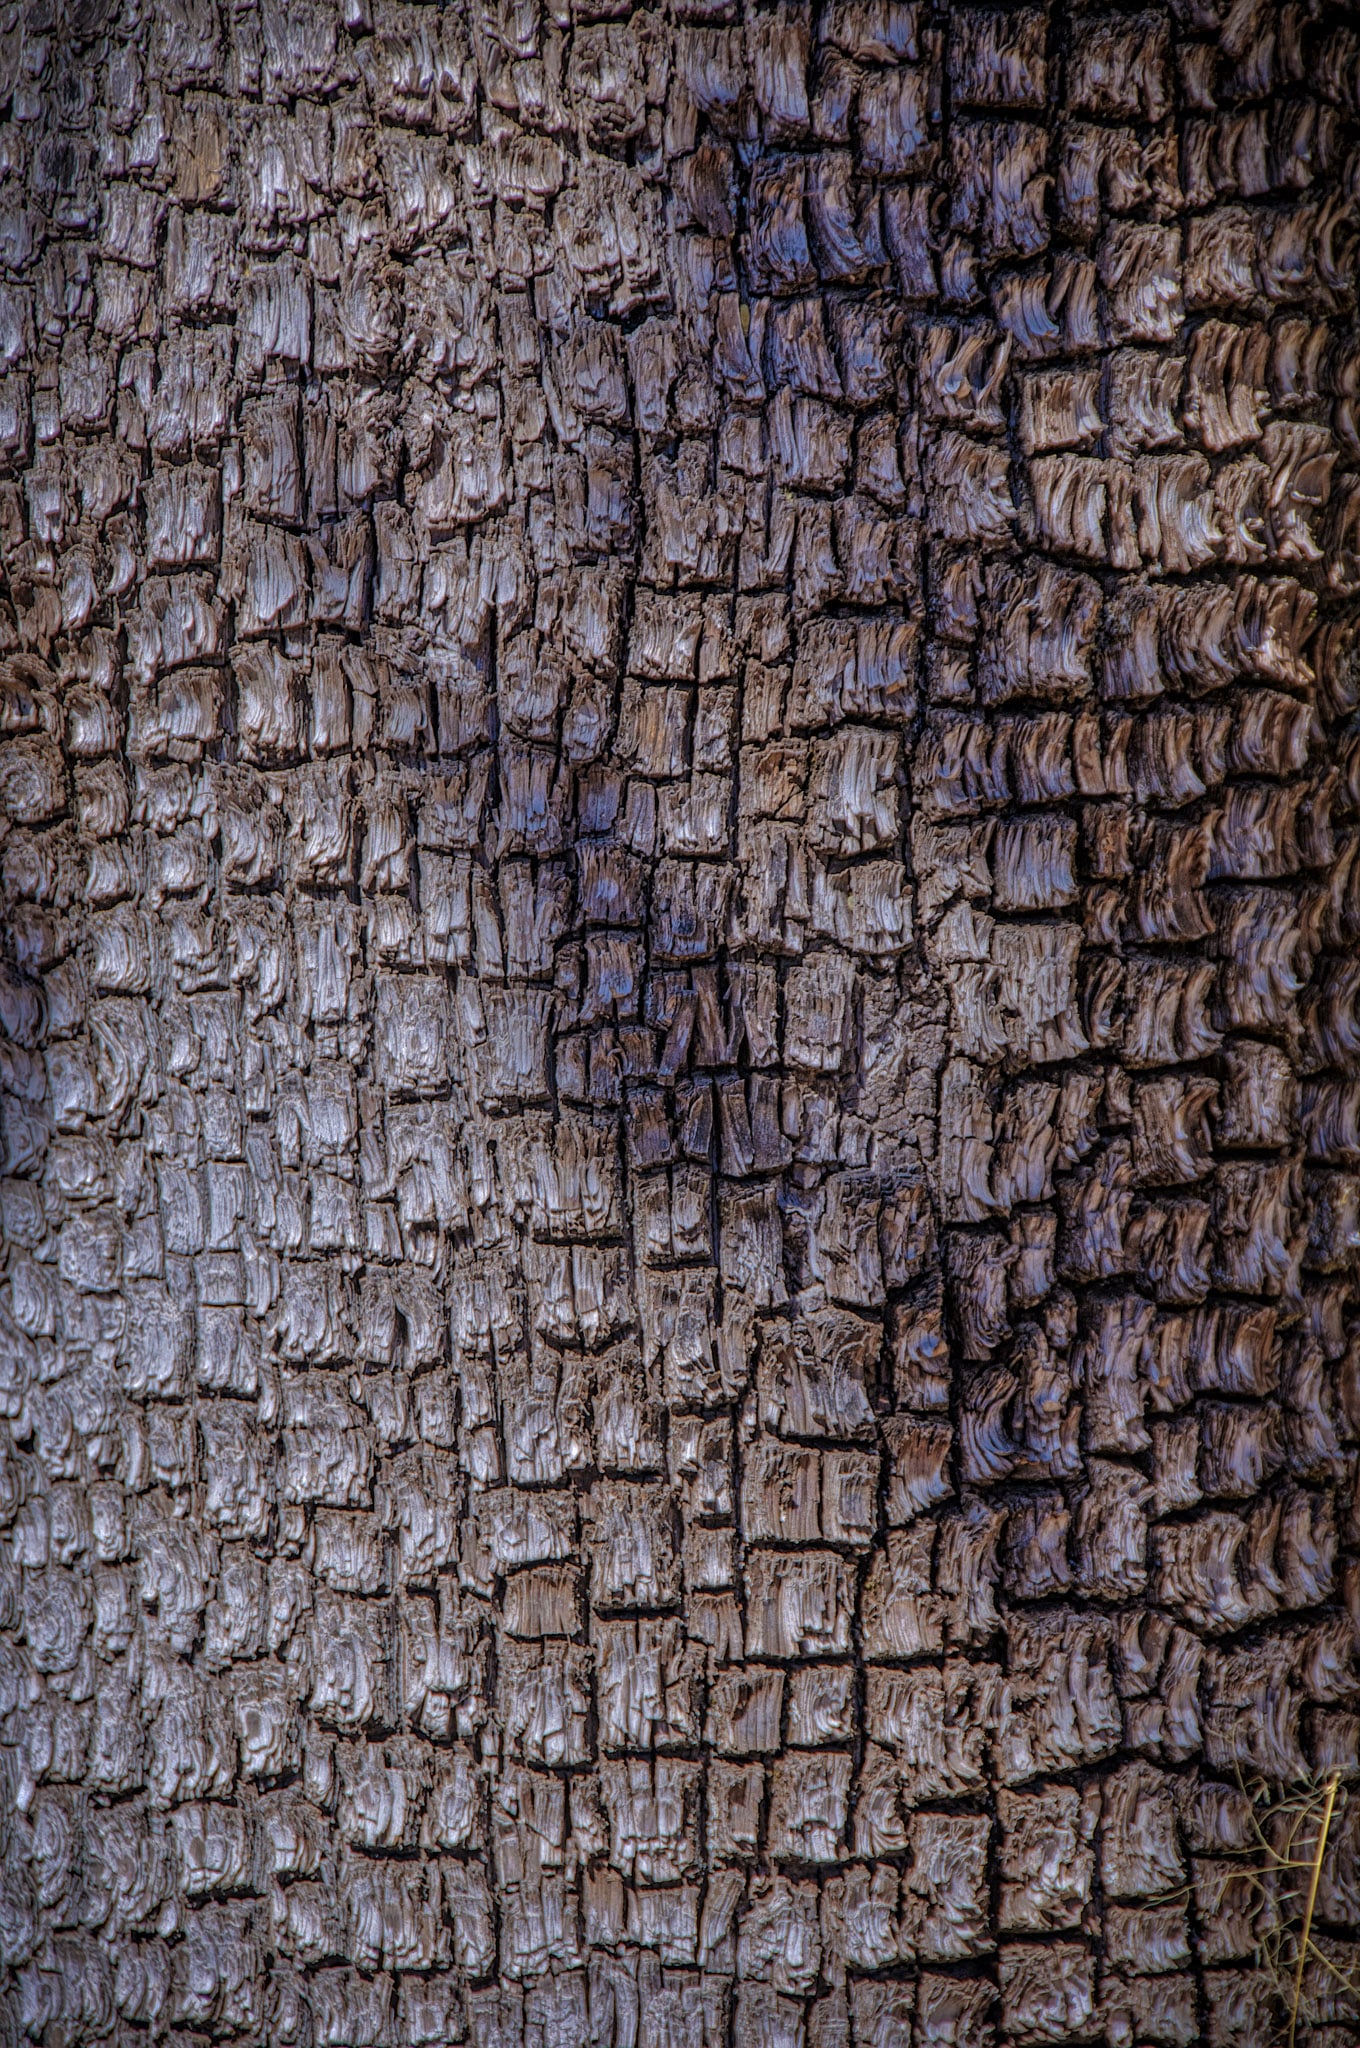 This alligator bark is typical of the Juniperus deppeana. This particular juniper tree grows near the Devils Den Canyon Study Area near Carlsbad, New Mexico.